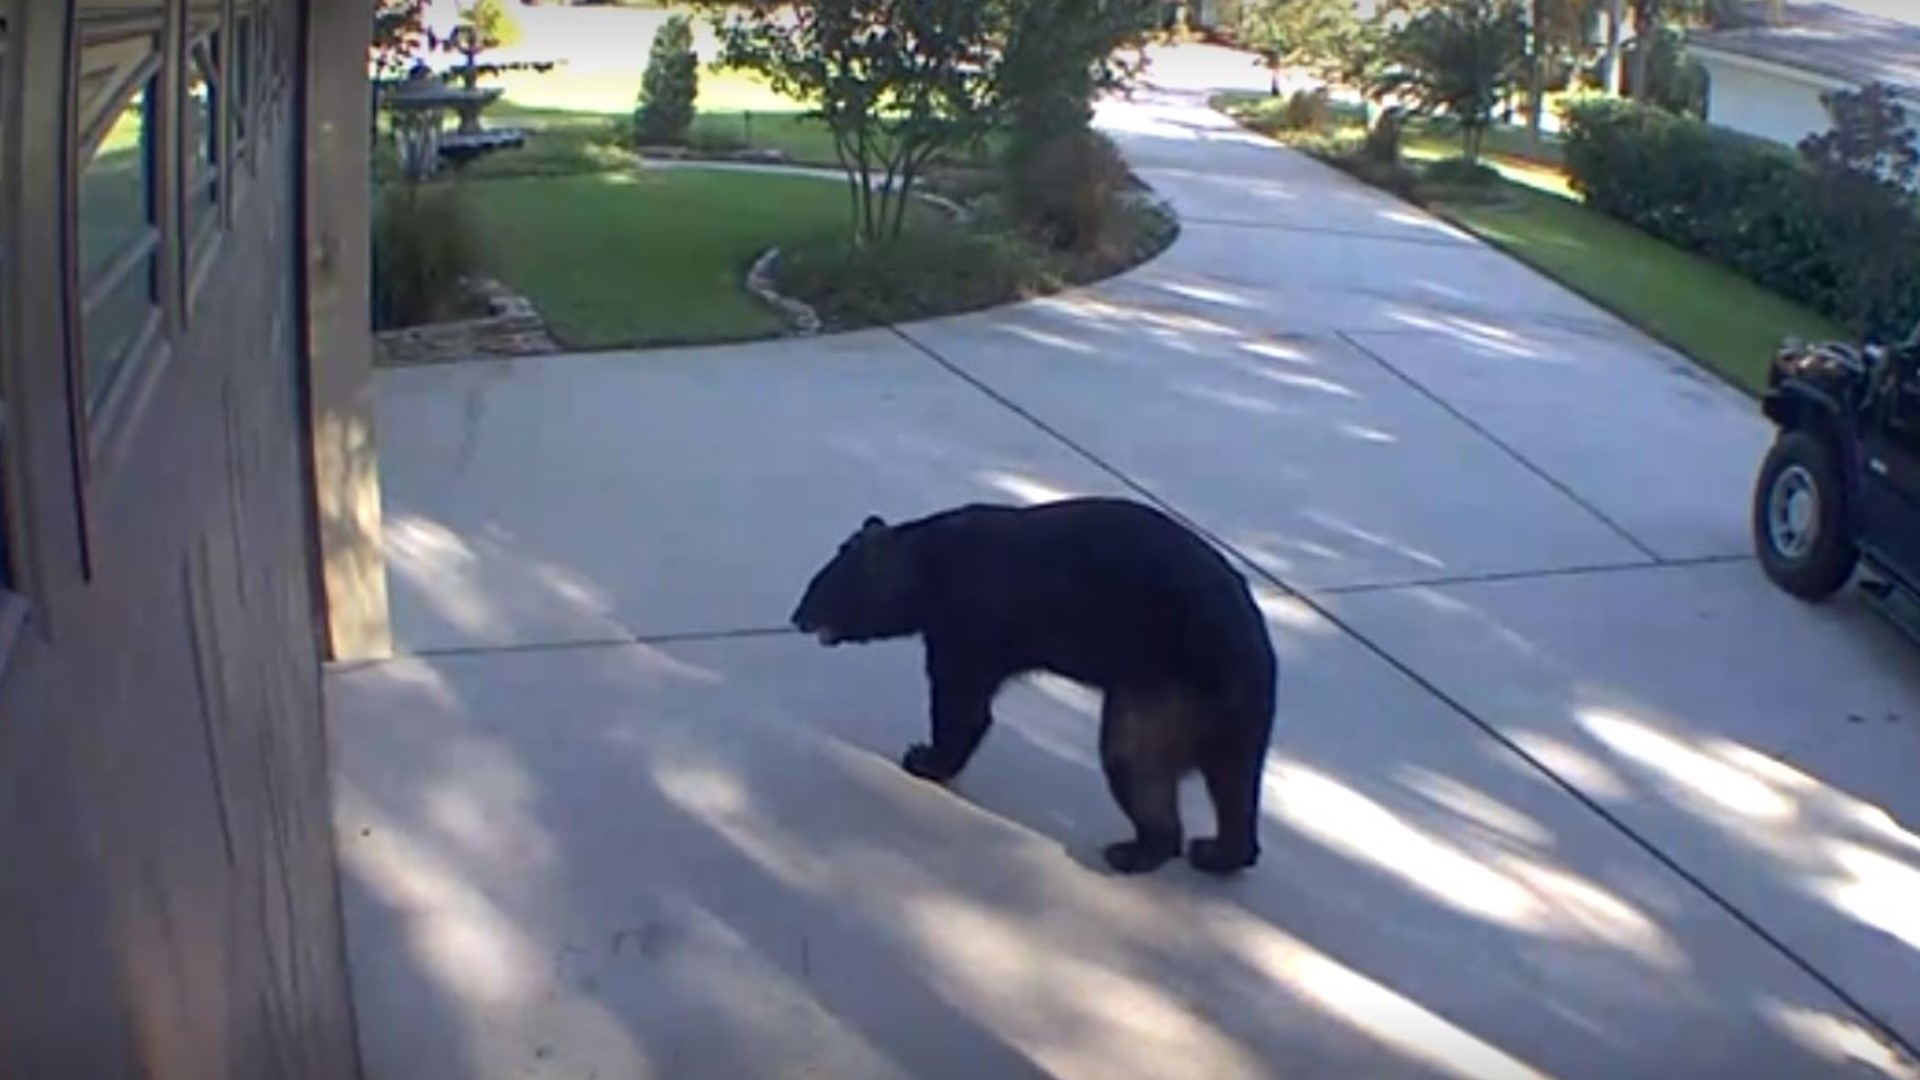 Other than damaging the pool cage screening, the bear rummaged through the family's refrigerator outside which was captured on video.